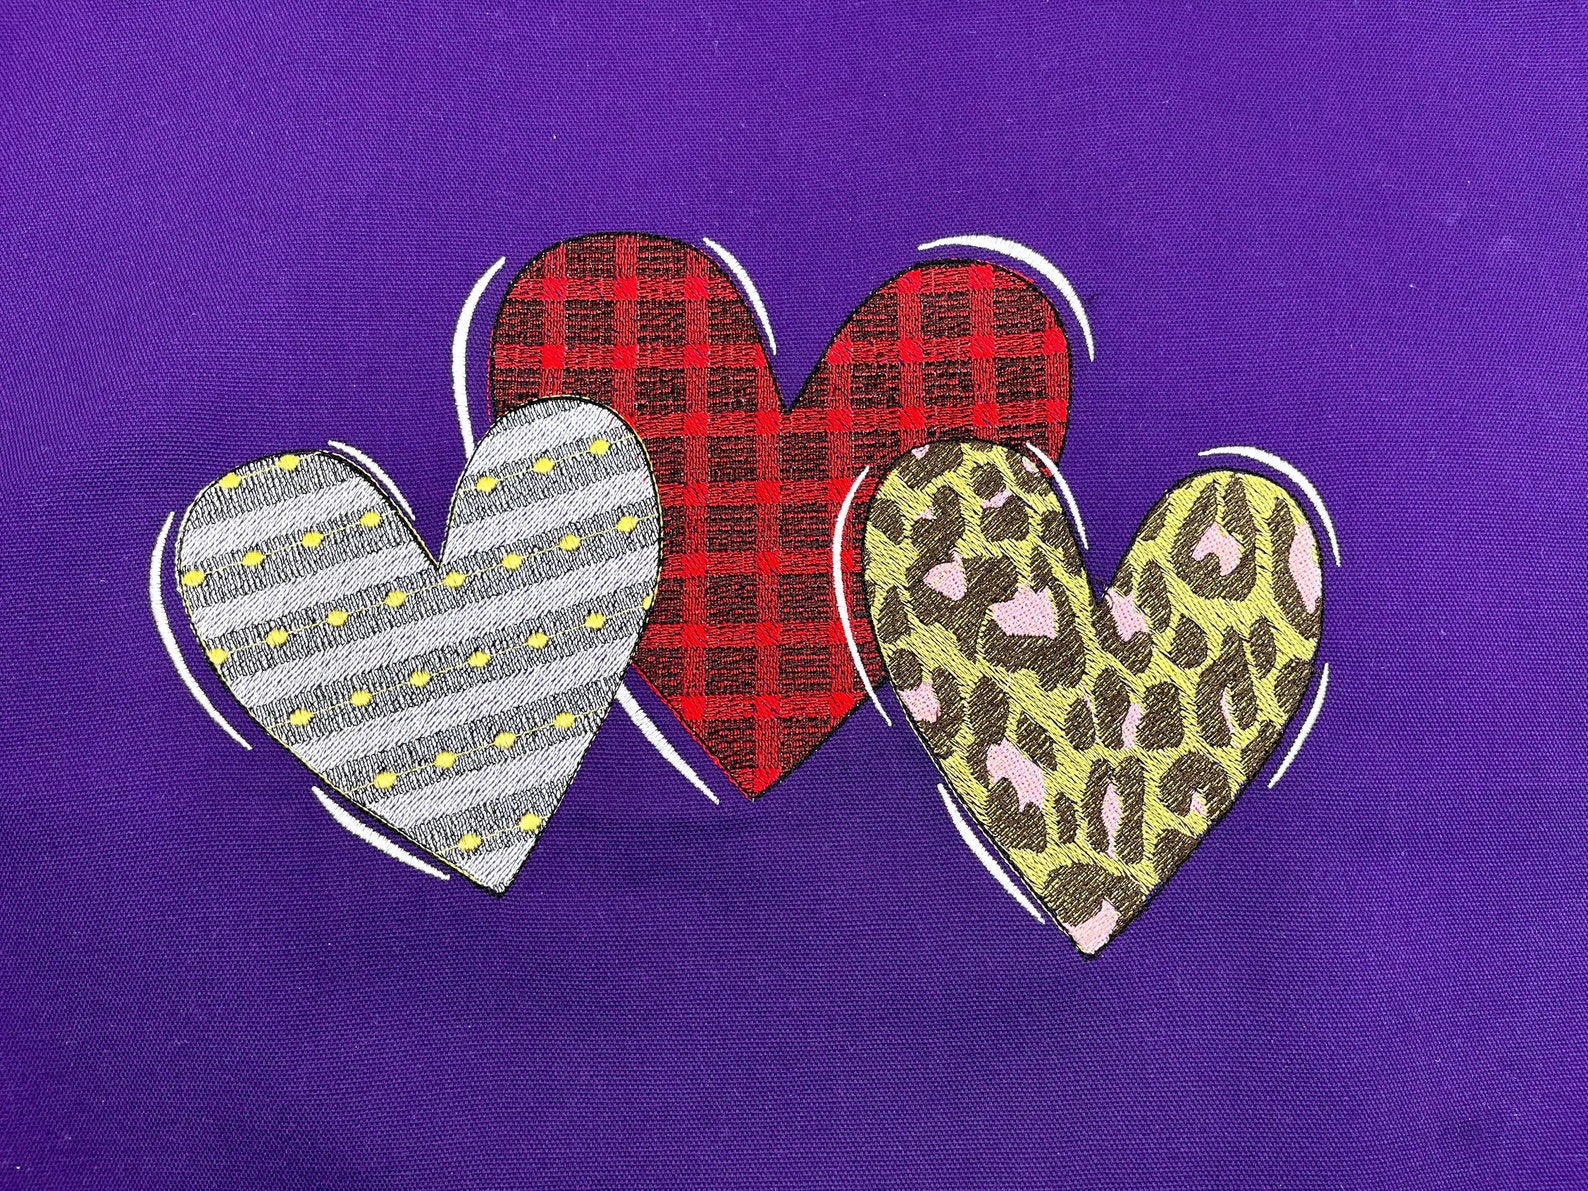 Valentine's Hearts Triple 3 Hearts in a Row Patterned - Etsy